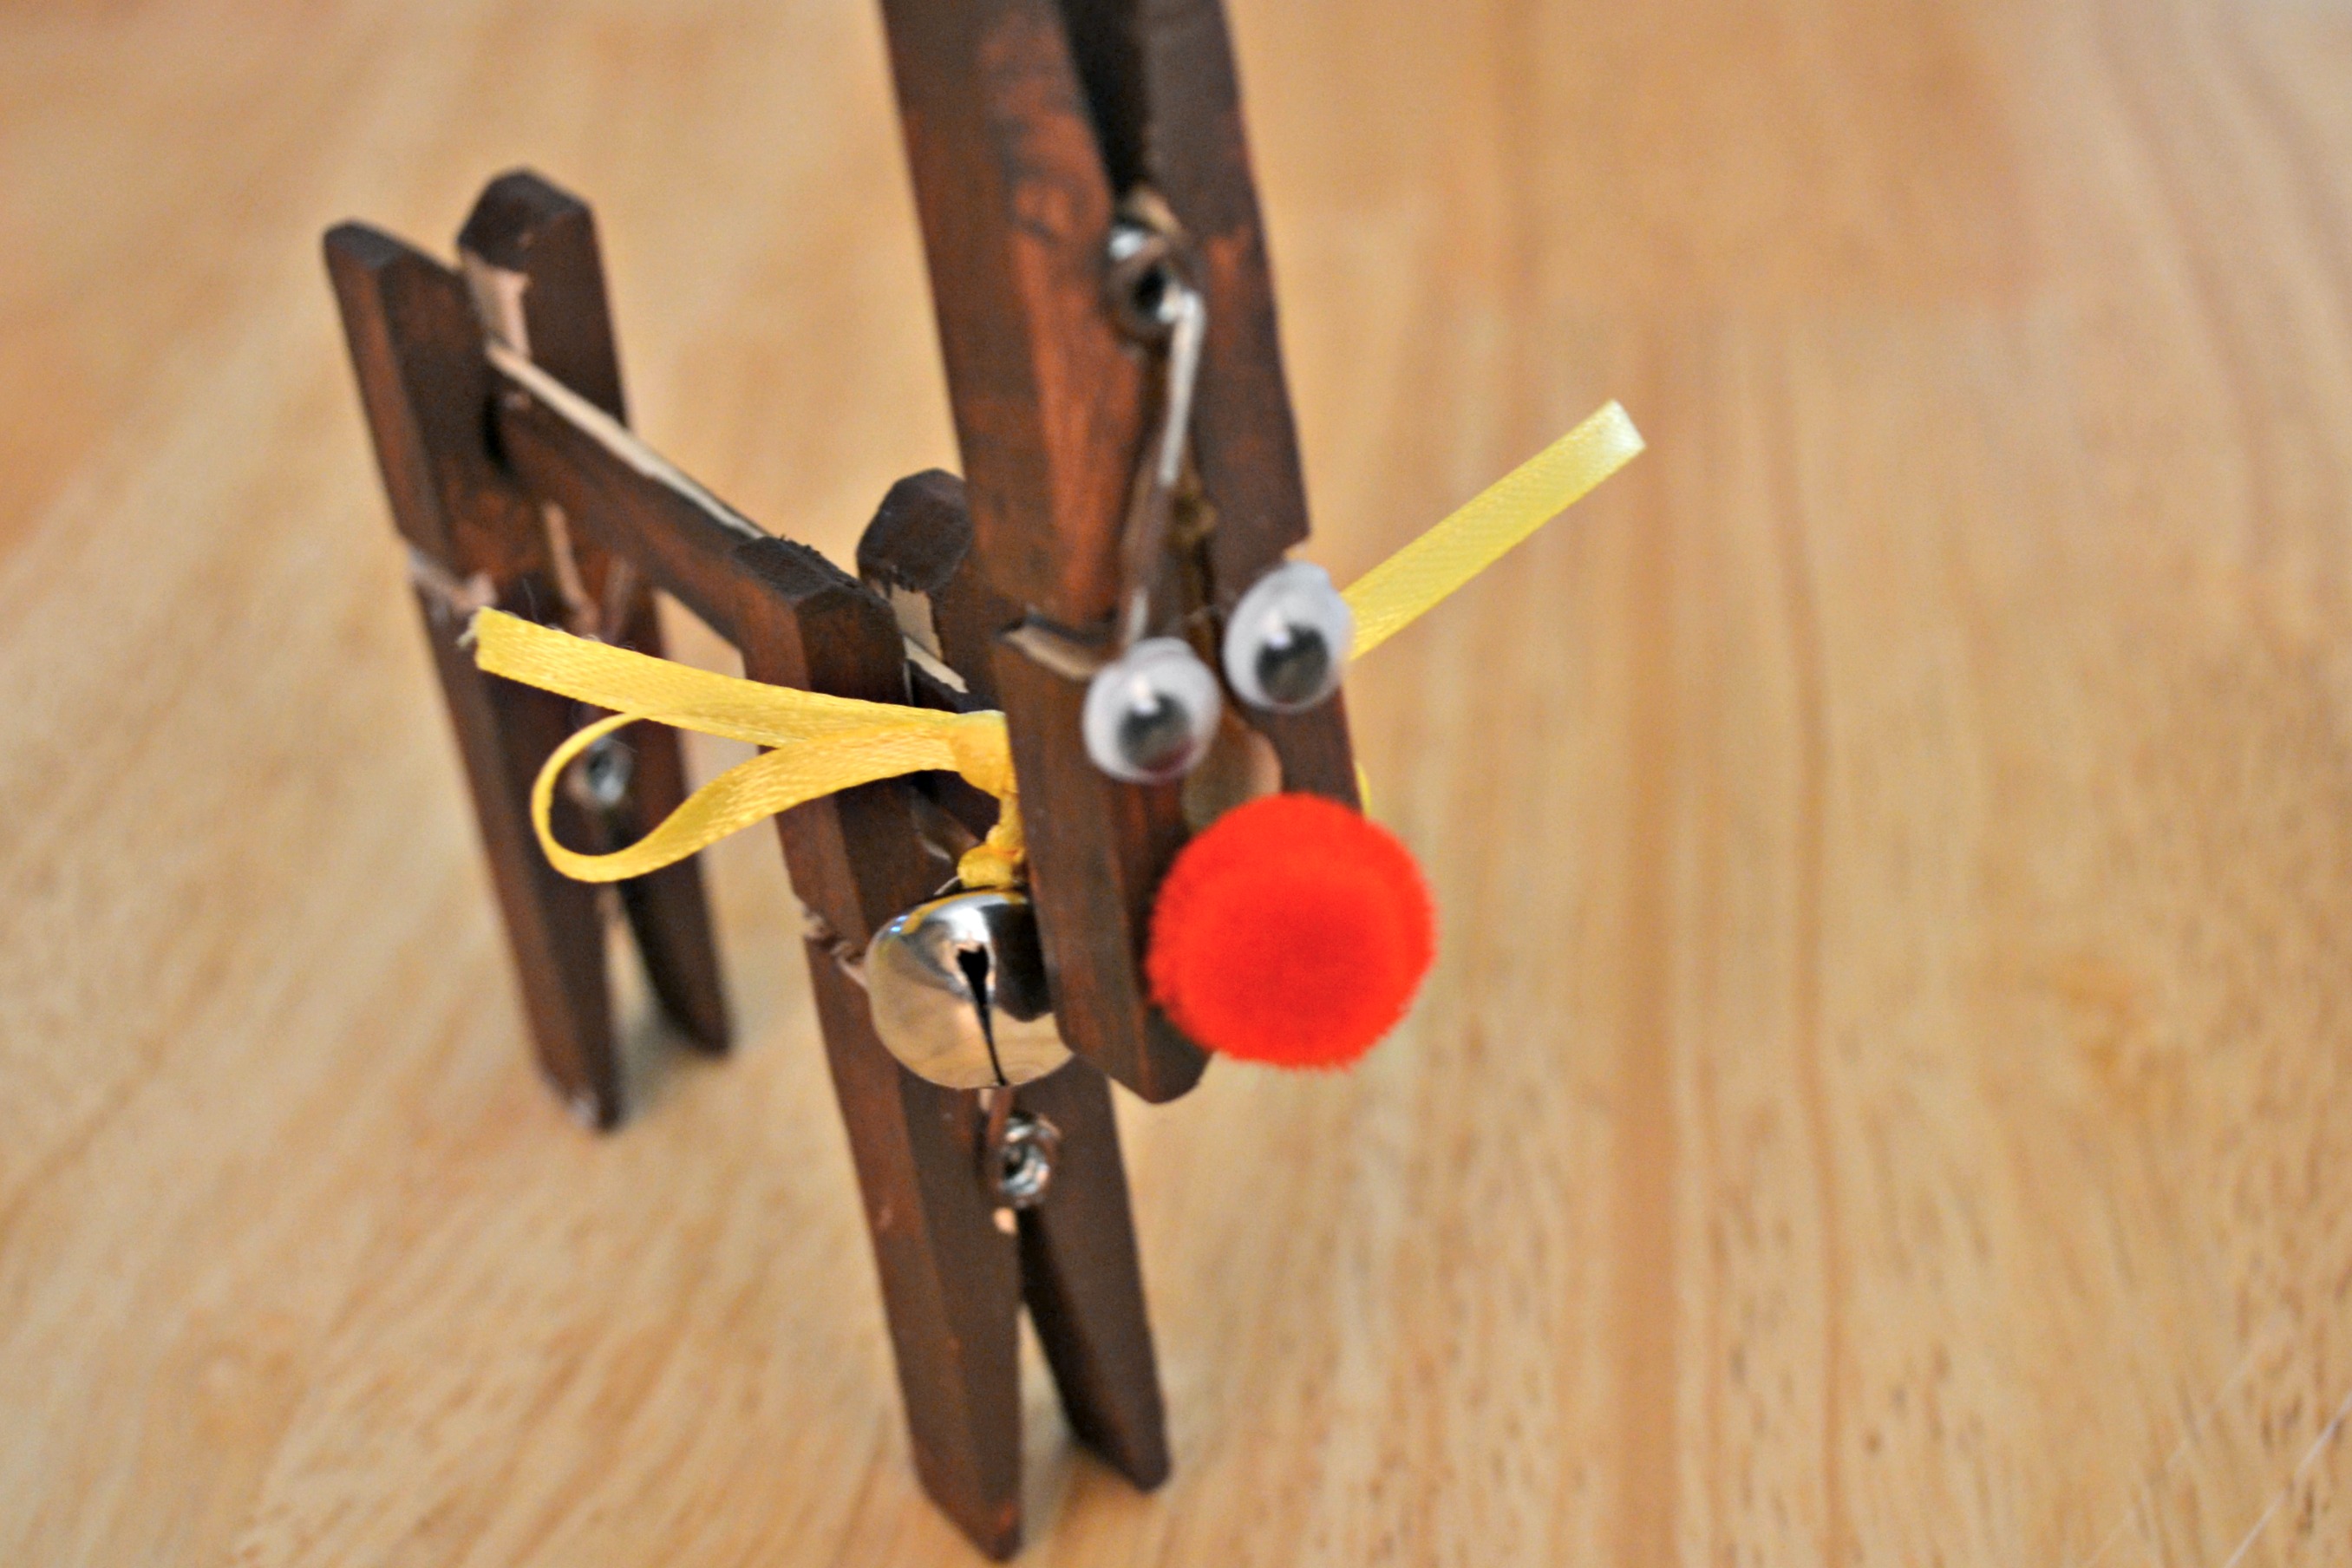 Weekend Clothespin Crafts with Discount School Supply - The Frugal Navy Wife